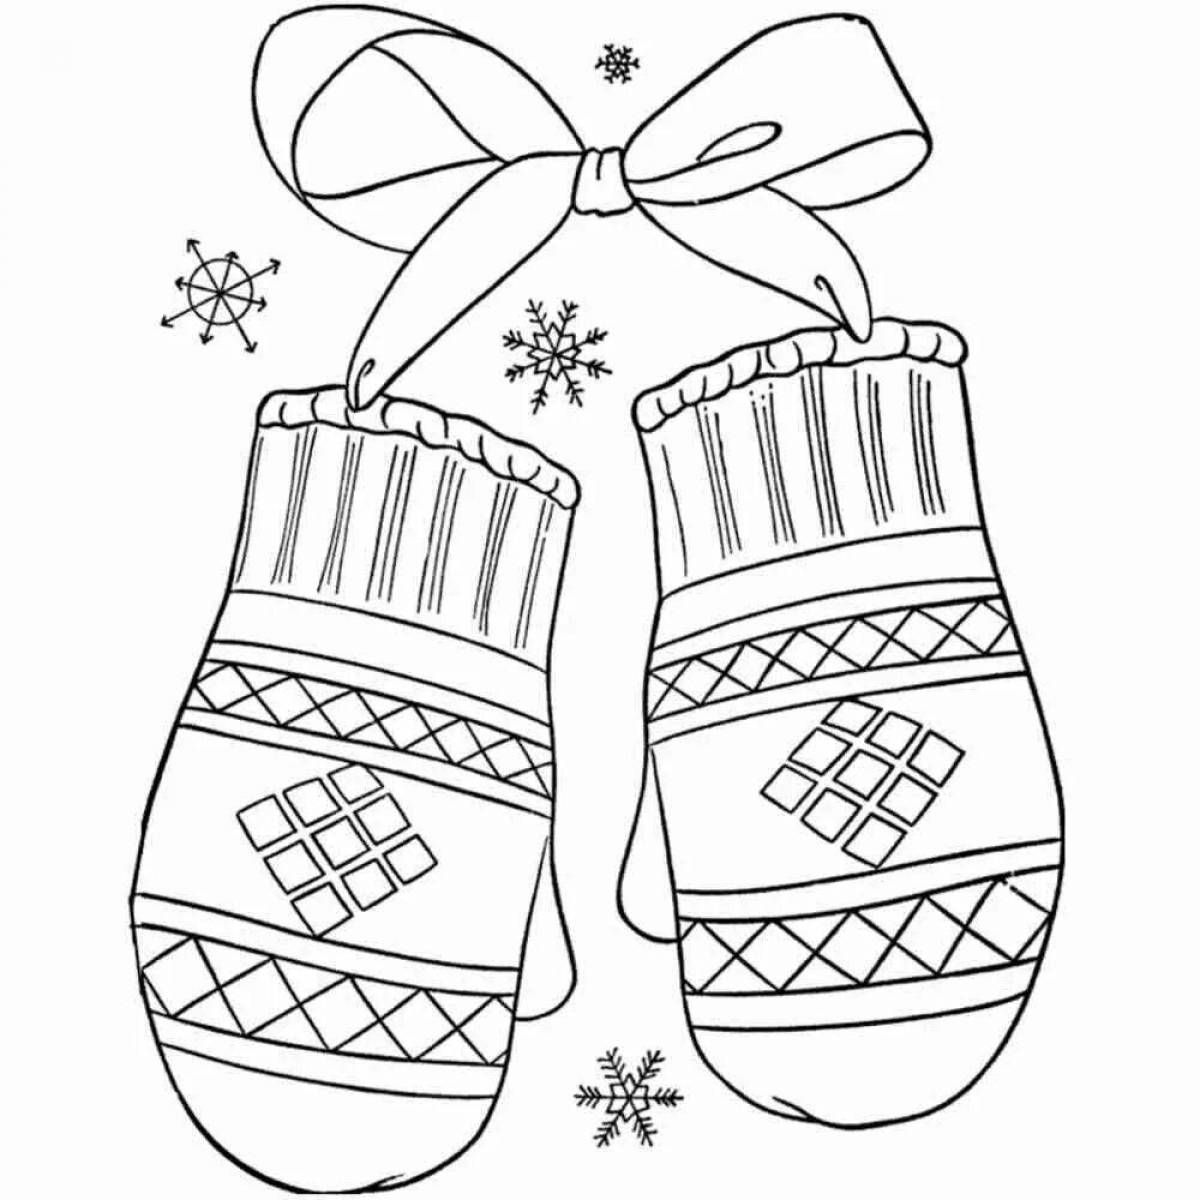 Explosive mitten coloring page for children 2-3 years old